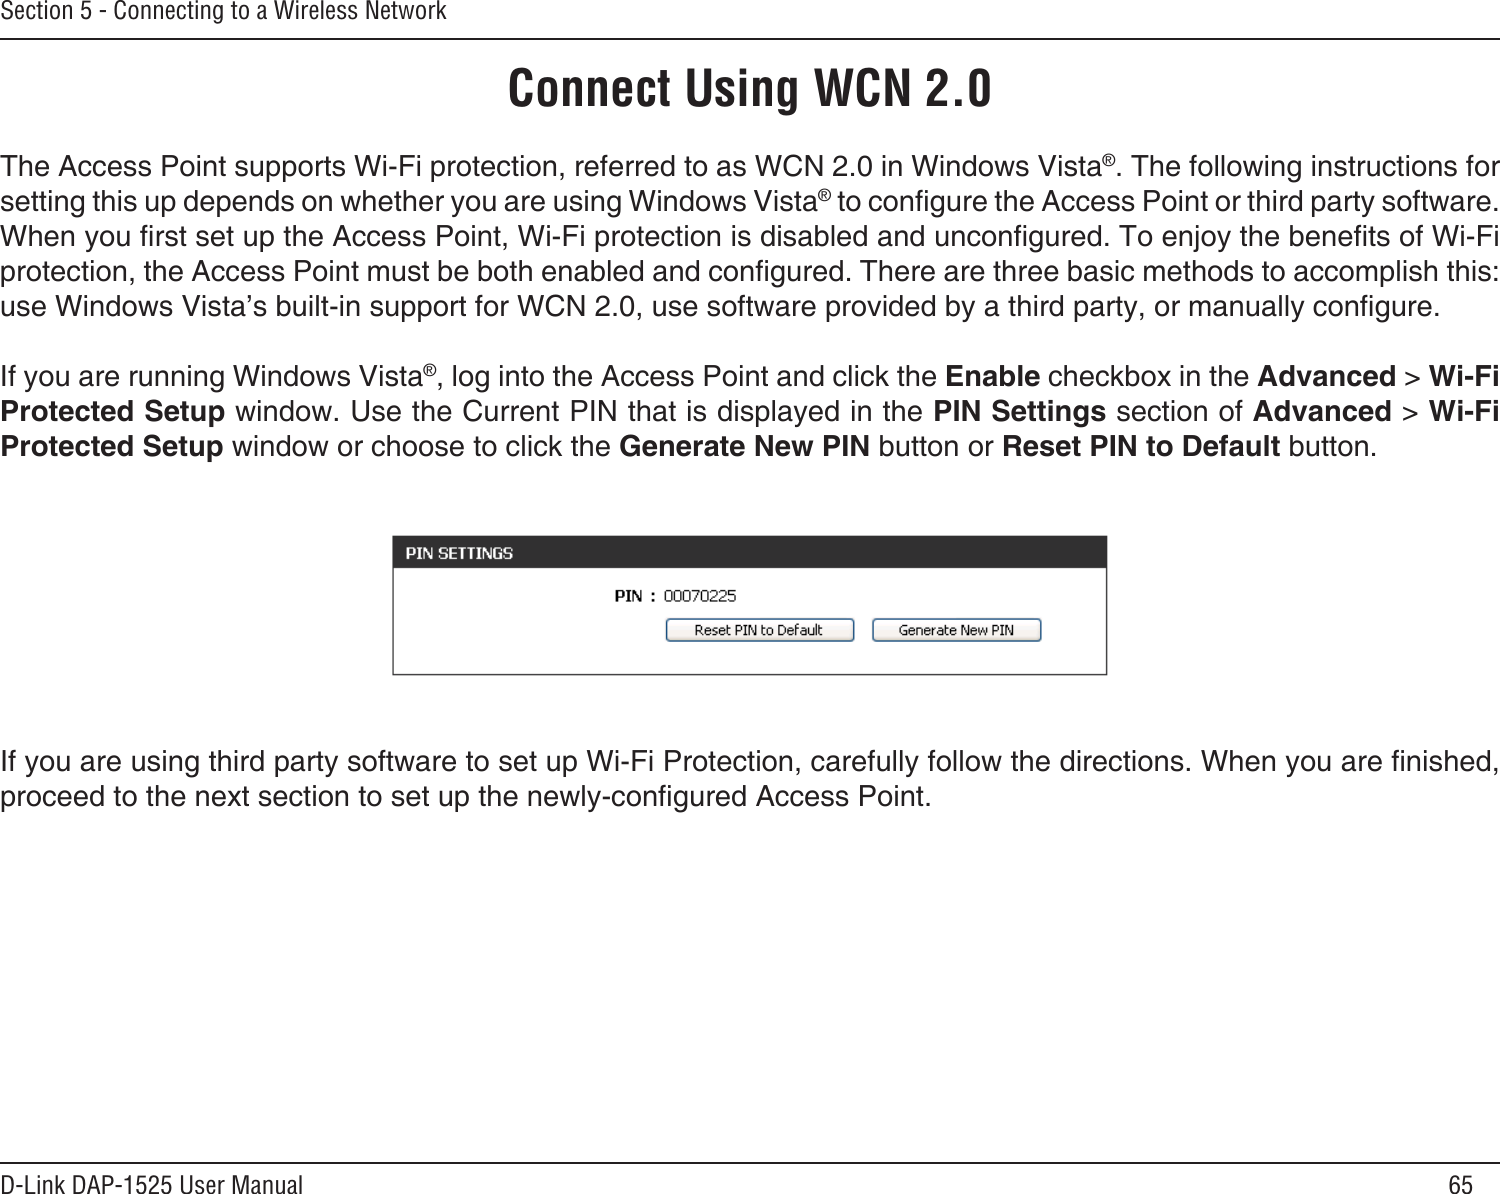 65D-Link DAP-1525 User ManualSection 5 - Connecting to a Wireless NetworkConnect Using WCN 2.0The Access Point supports Wi-Fi protection, referred to as WCN 2.0 in Windows Vista®. The following instructions for setting this up depends on whether you are using Windows Vista® to congure the Access Point or third party software.When you rst set up the Access Point, Wi-Fi protection is disabled and uncongured. To enjoy the benets of Wi-Fi protection, the Access Point must be both enabled and congured. There are three basic methods to accomplish this: use Windows Vista’s built-in support for WCN 2.0, use software provided by a third party, or manually congure. If you are running Windows Vista®, log into the Access Point and click the Enable checkbox in the Advanced &gt; Wi-Fi Protected Setup window. Use the Current PIN that is displayed in the PIN Settings section of Advanced &gt; Wi-Fi Protected Setup window or choose to click the Generate New PIN button or Reset PIN to Default button. If you are using third party software to set up Wi-Fi Protection, carefully follow the directions. When you are nished, proceed to the next section to set up the newly-congured Access Point. 